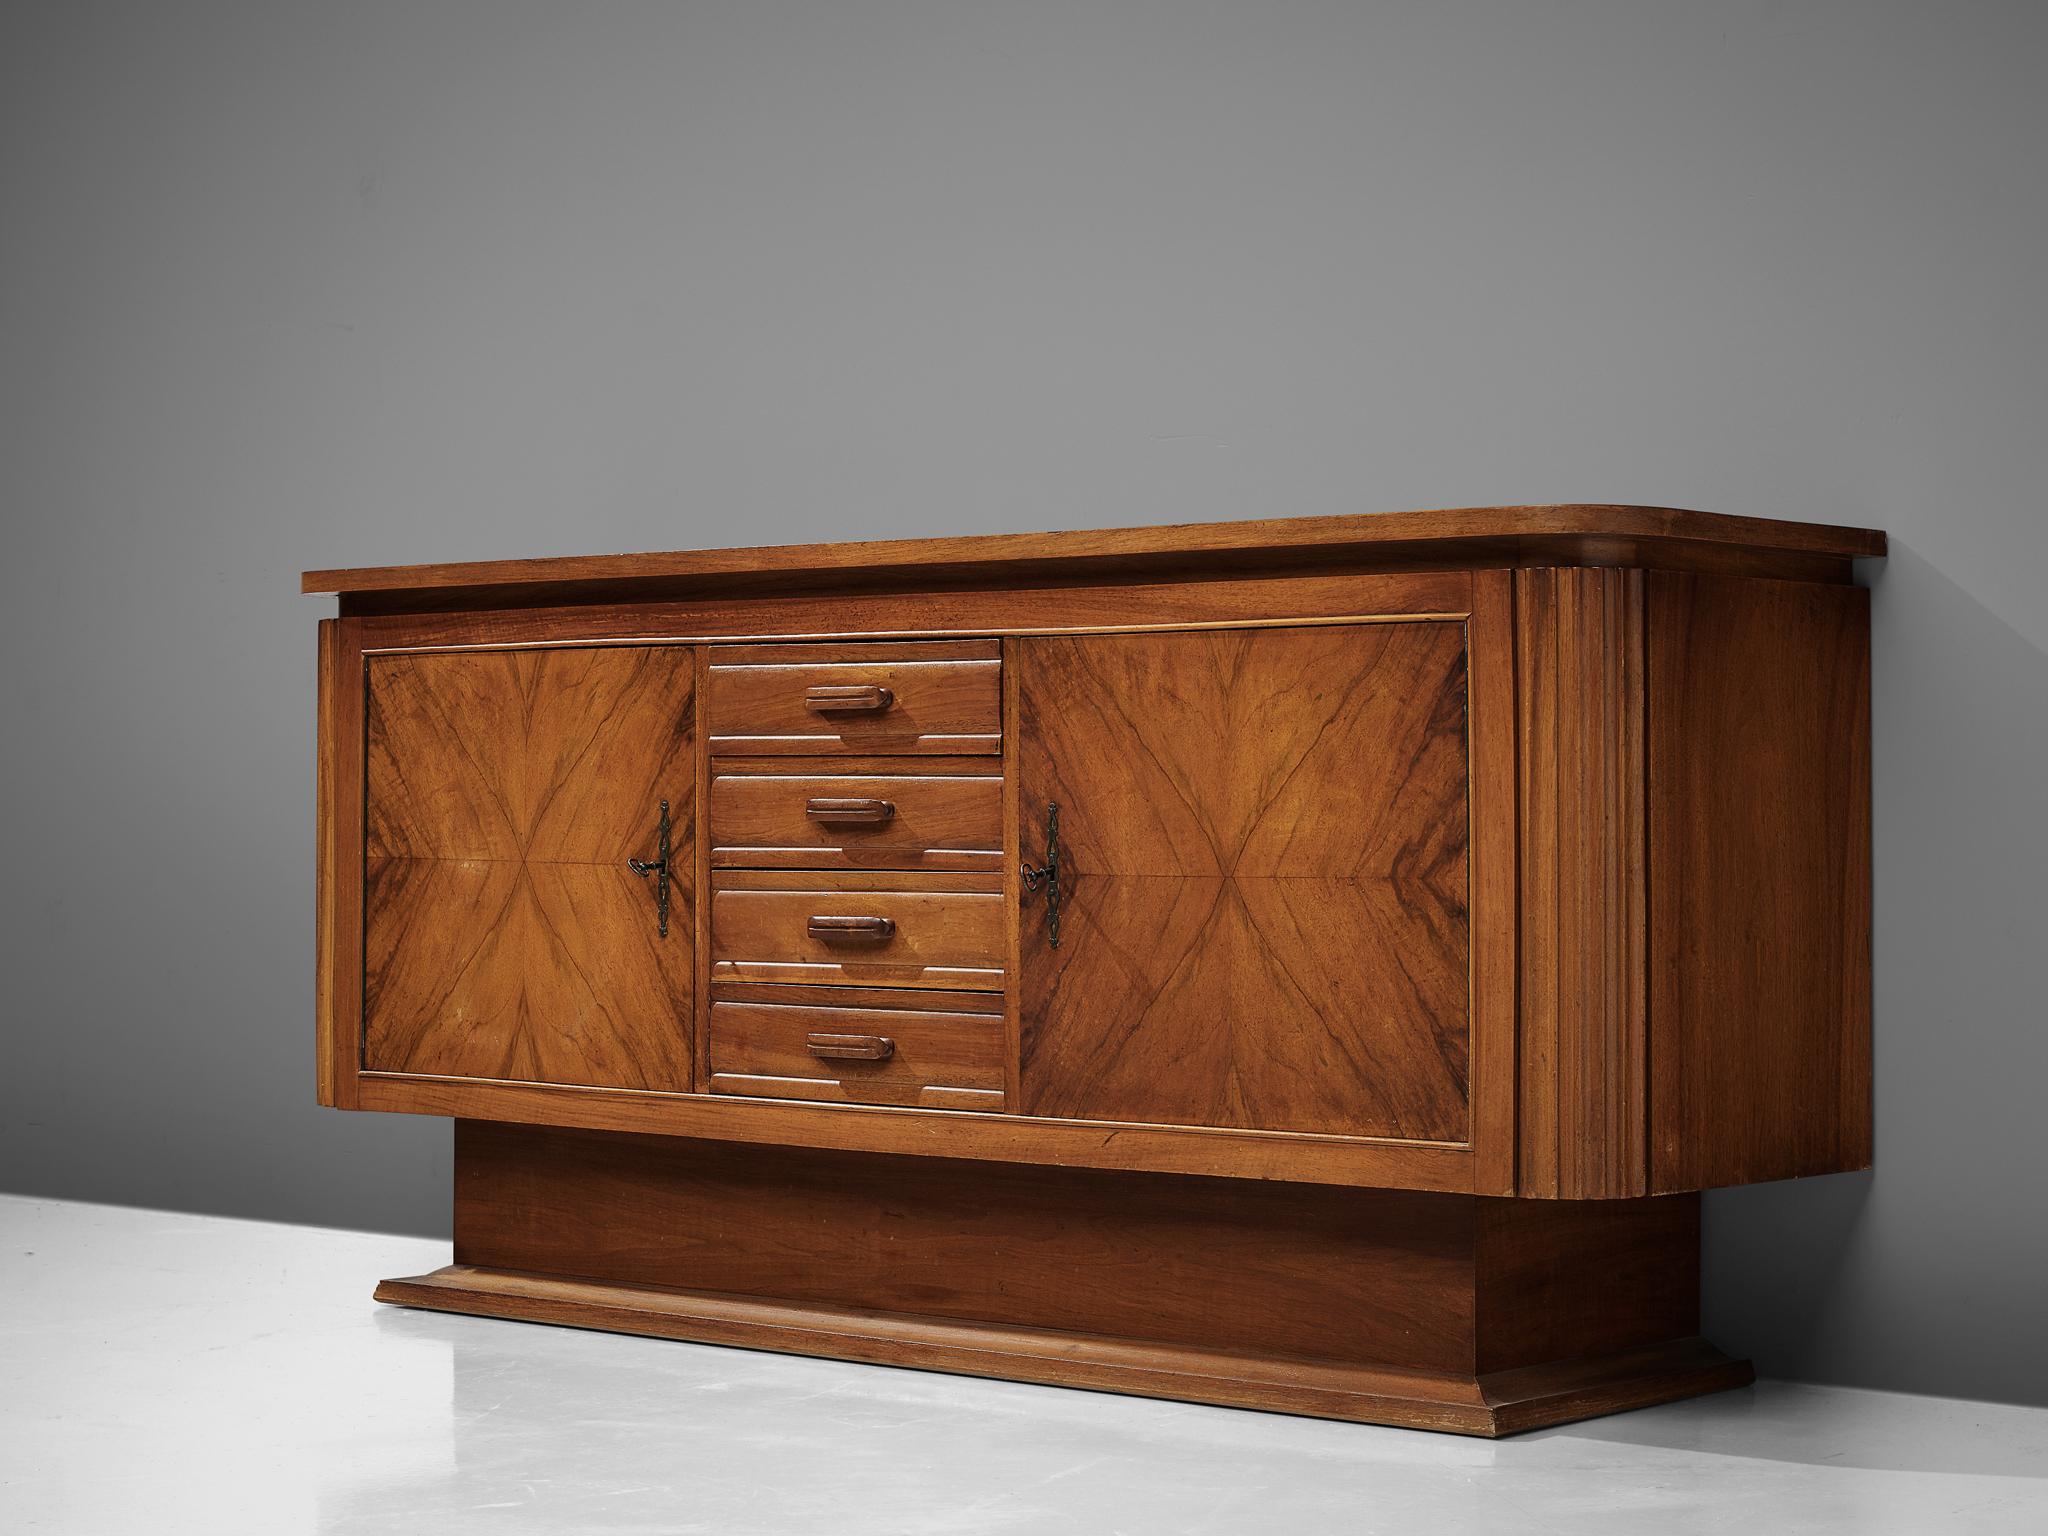 Sideboard, walnut, iron, Europe, 1950s

This sturdy pedestal sideboard features two doors and four drawers on the front. The doors are finished with beautiful book-matched walnut veneer and decorative iron locks. The corners are rounded and contain